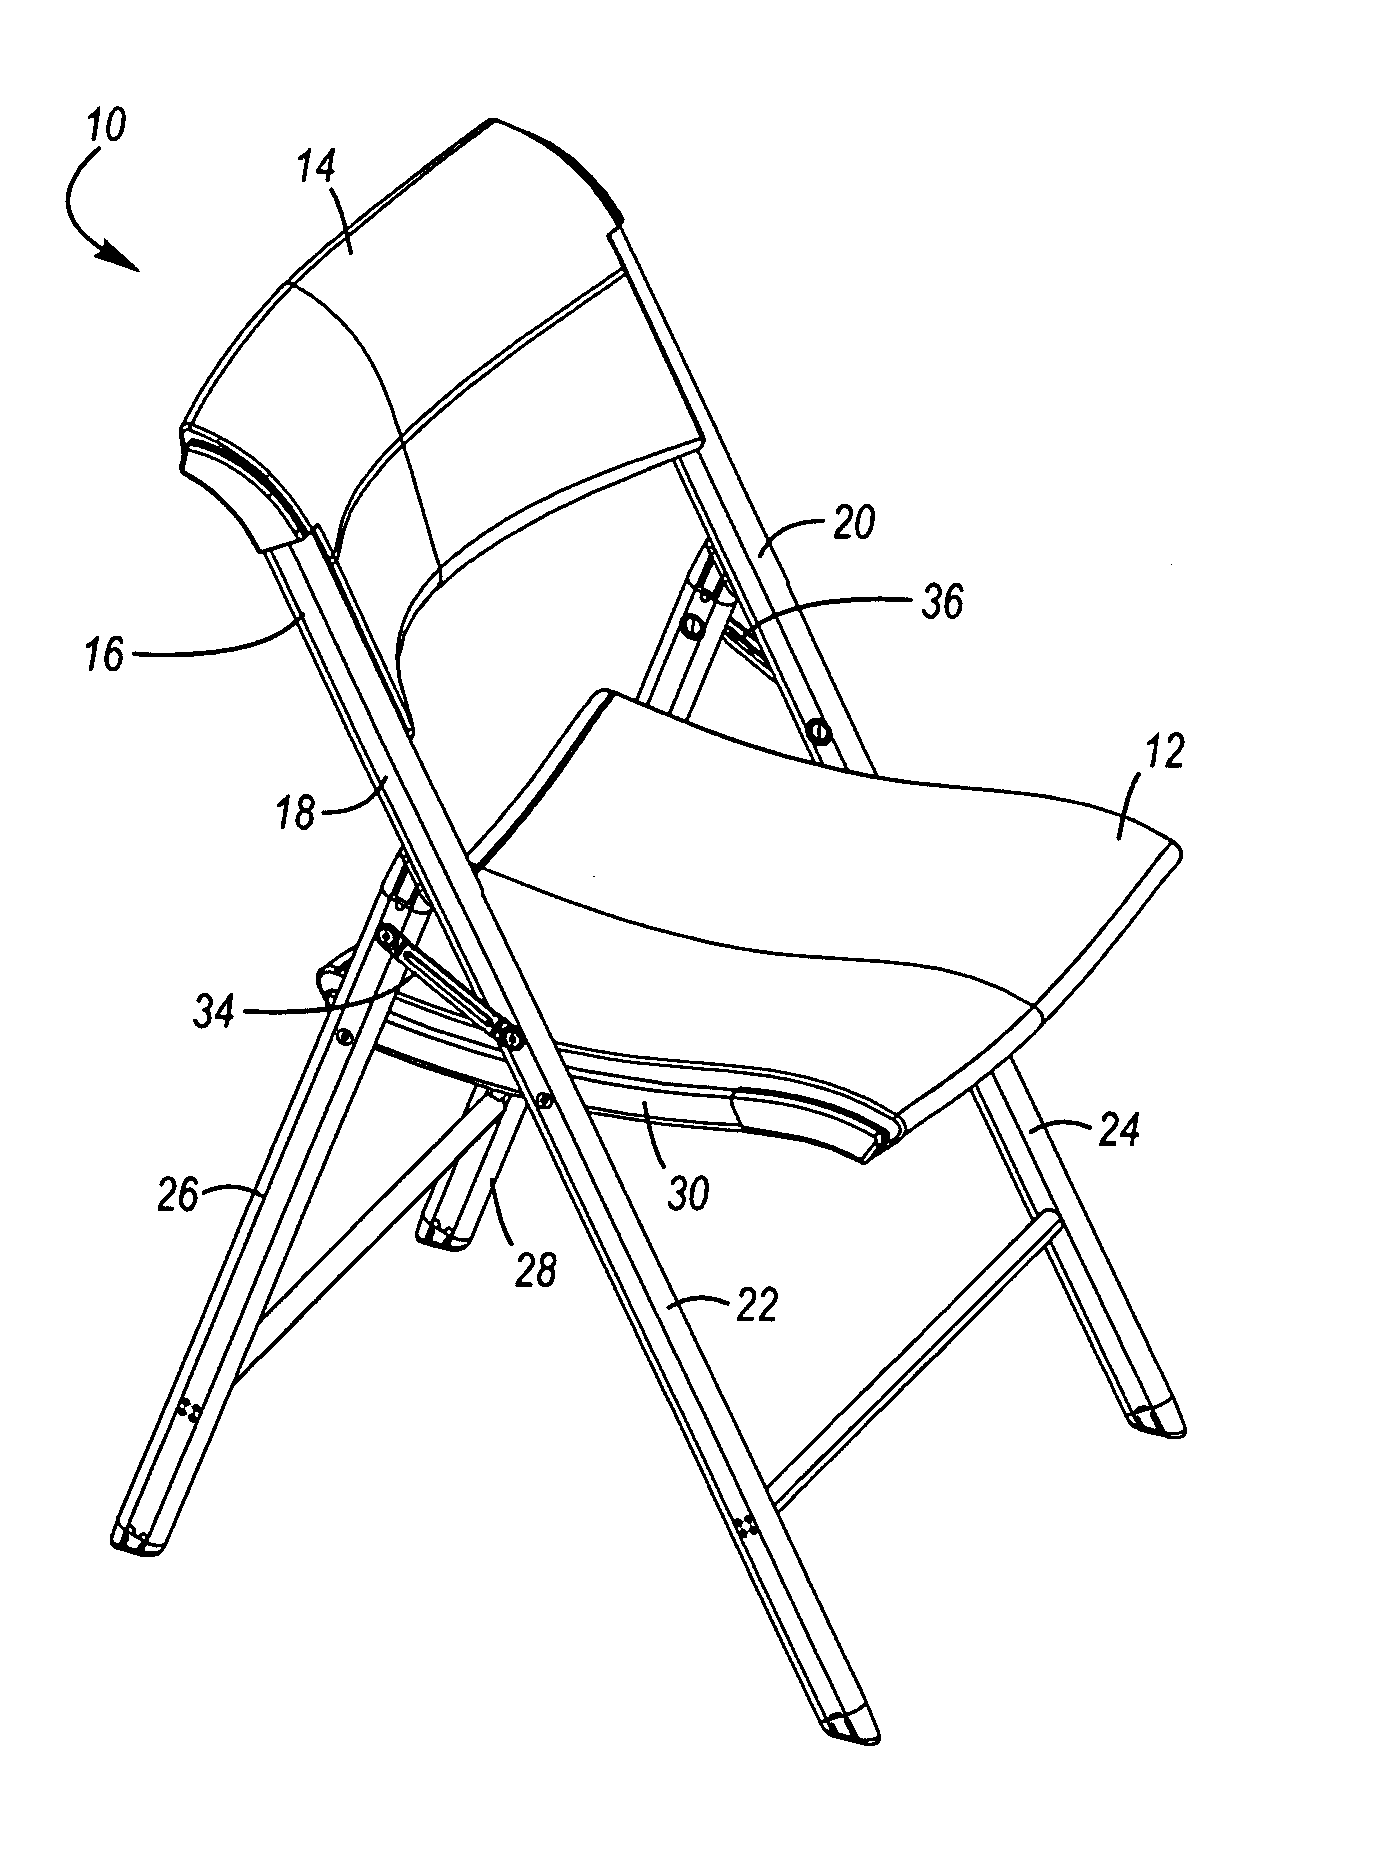 Folding chair with molded components